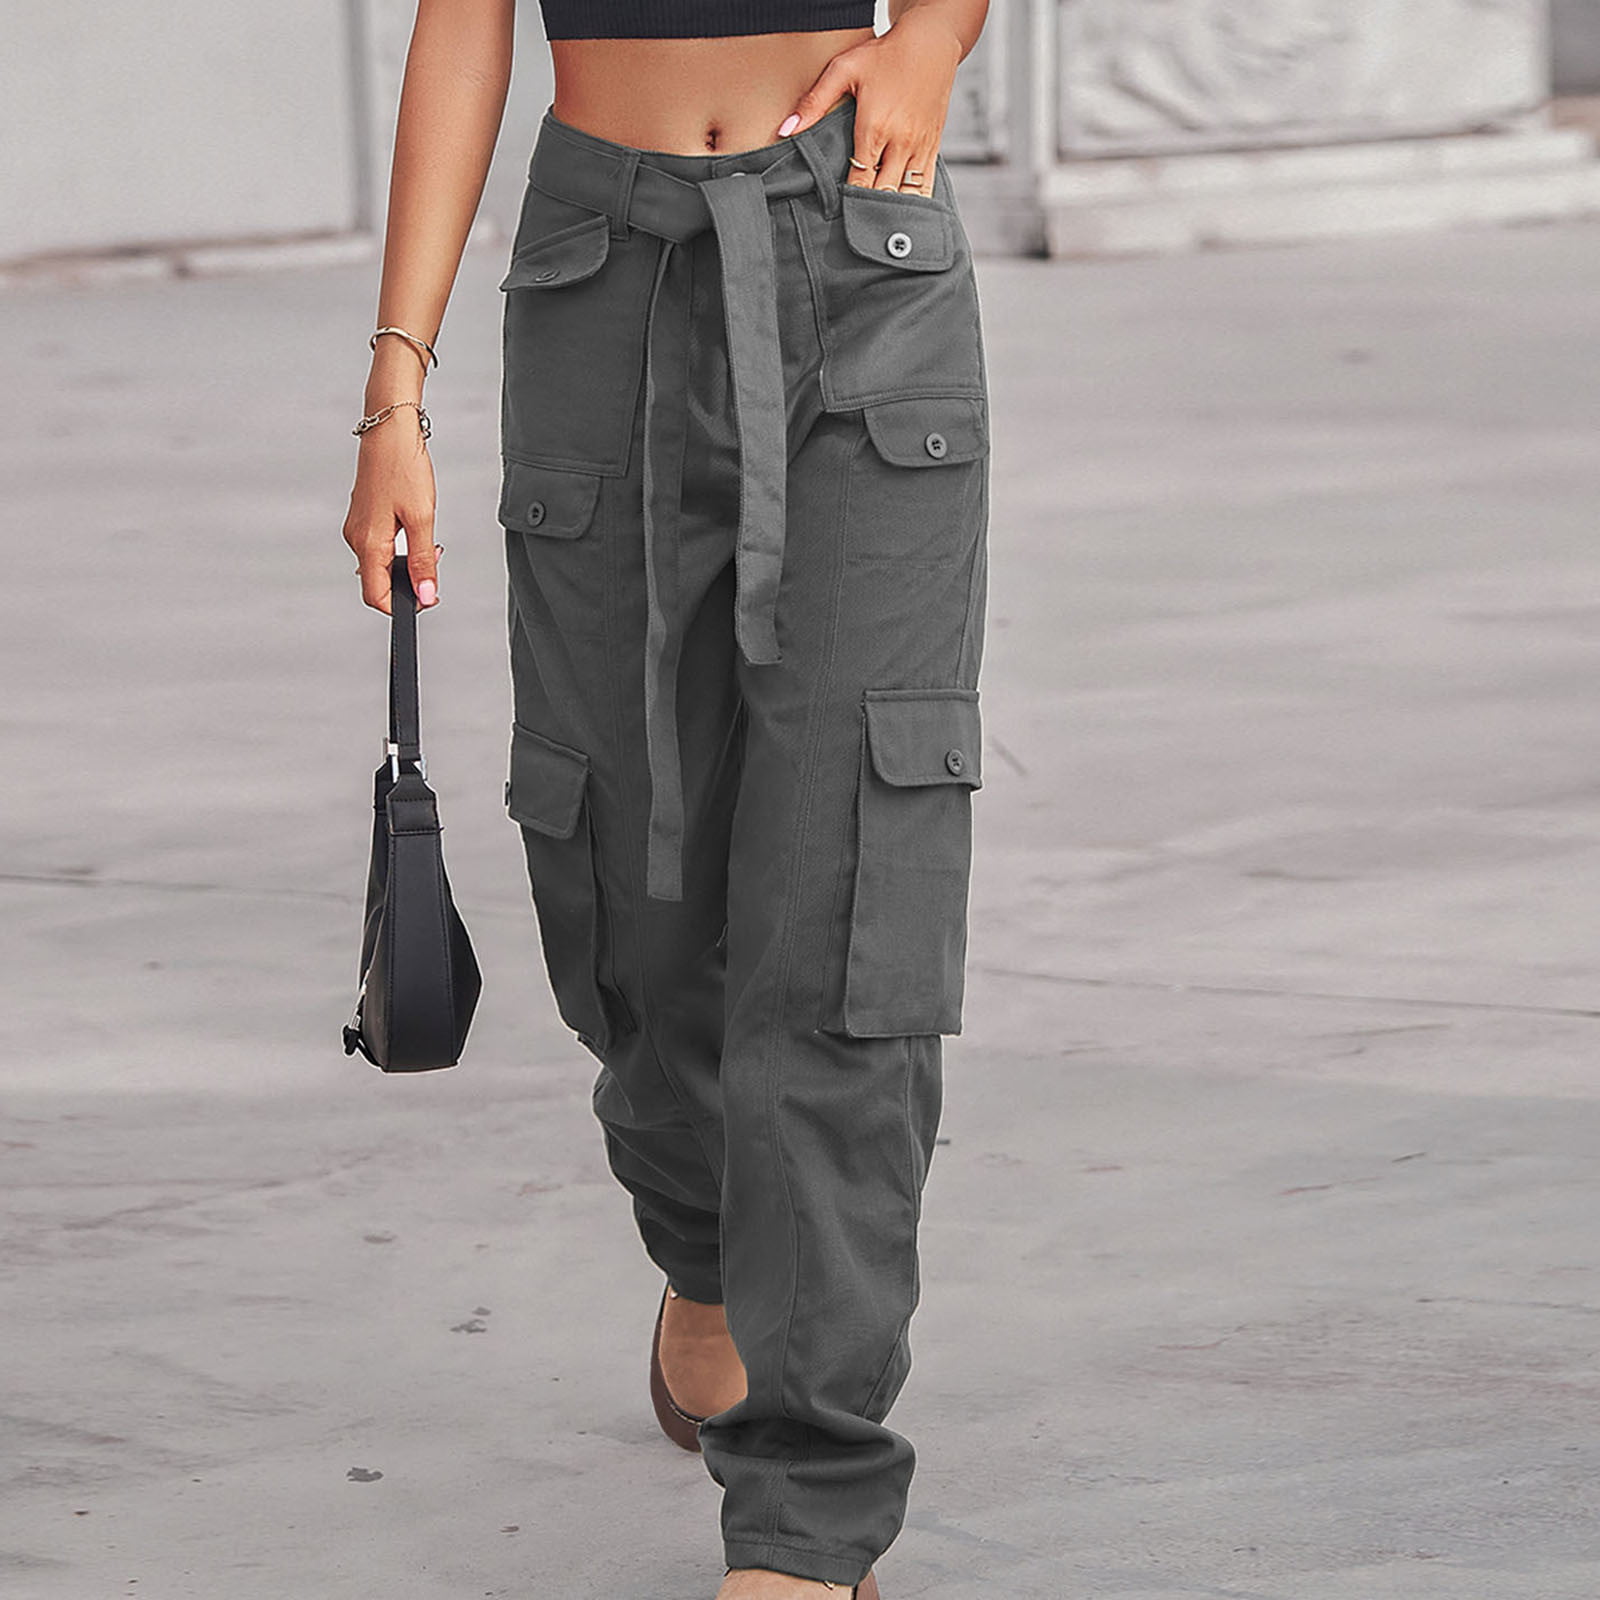 RQYYD Cargo Pants Women Casual Loose High Waisted Straight Leg Baggy Pants  Trousers Lightweight Outdoor Travel Pants with Pockets(Army Green,XXL)